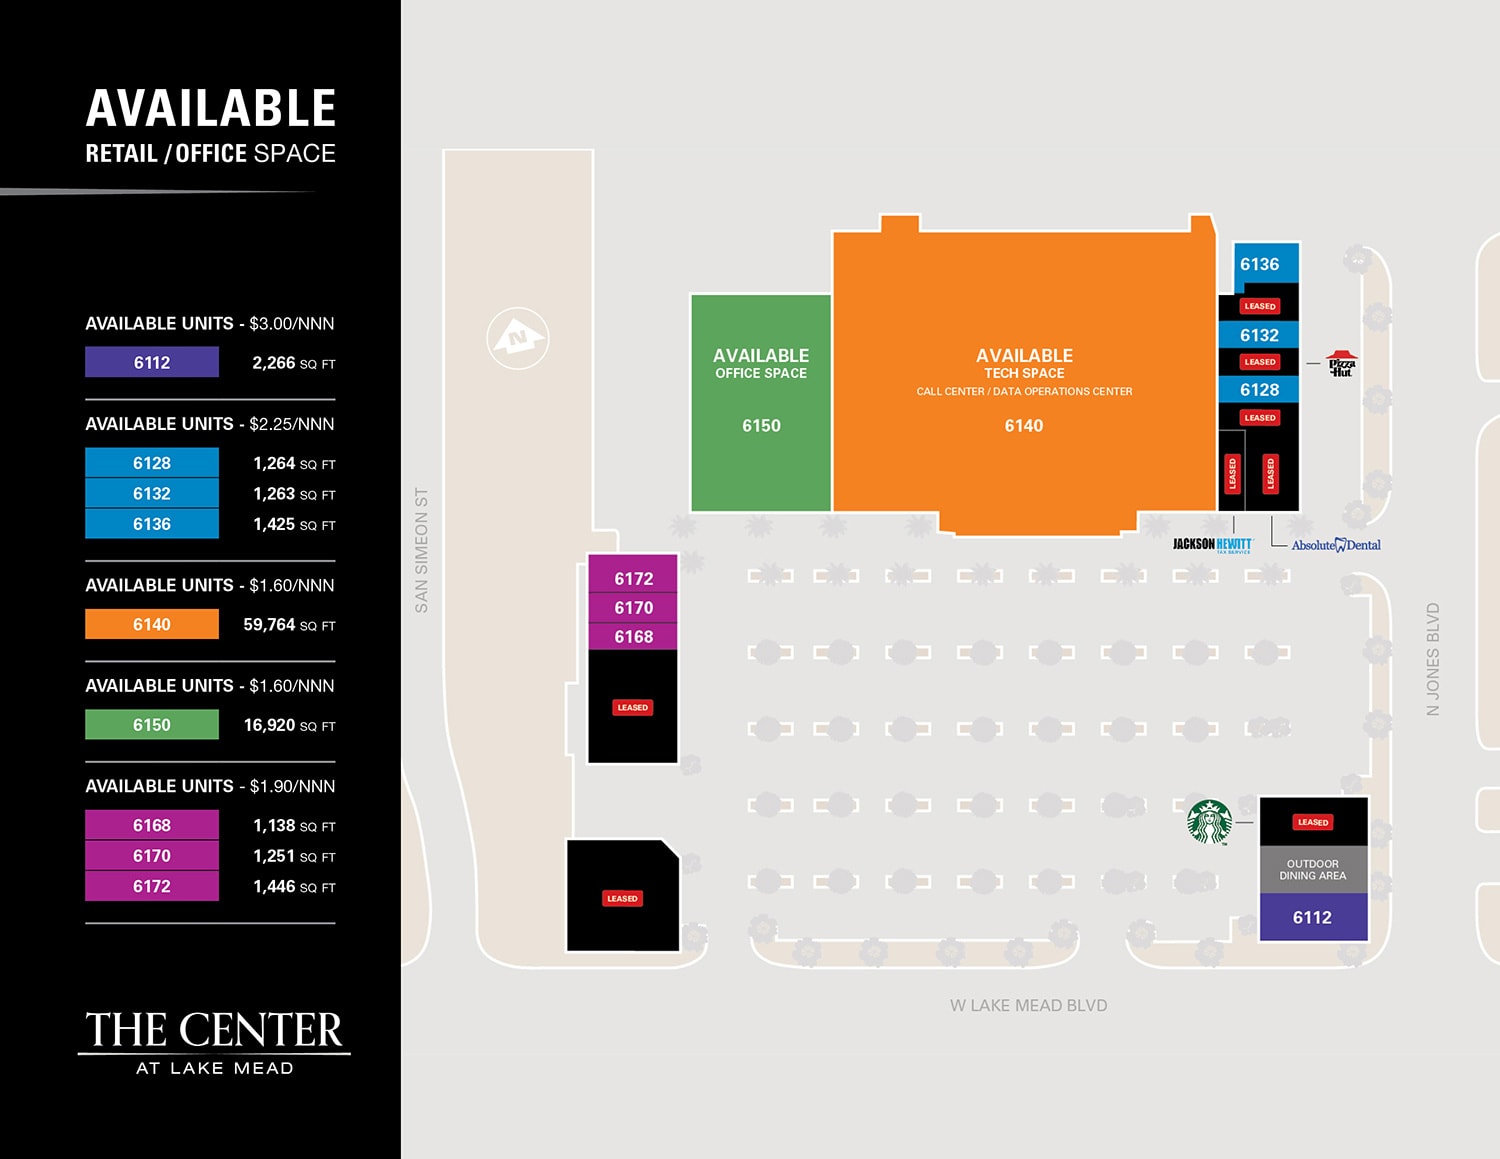 the center at lake mead-available space diagram b